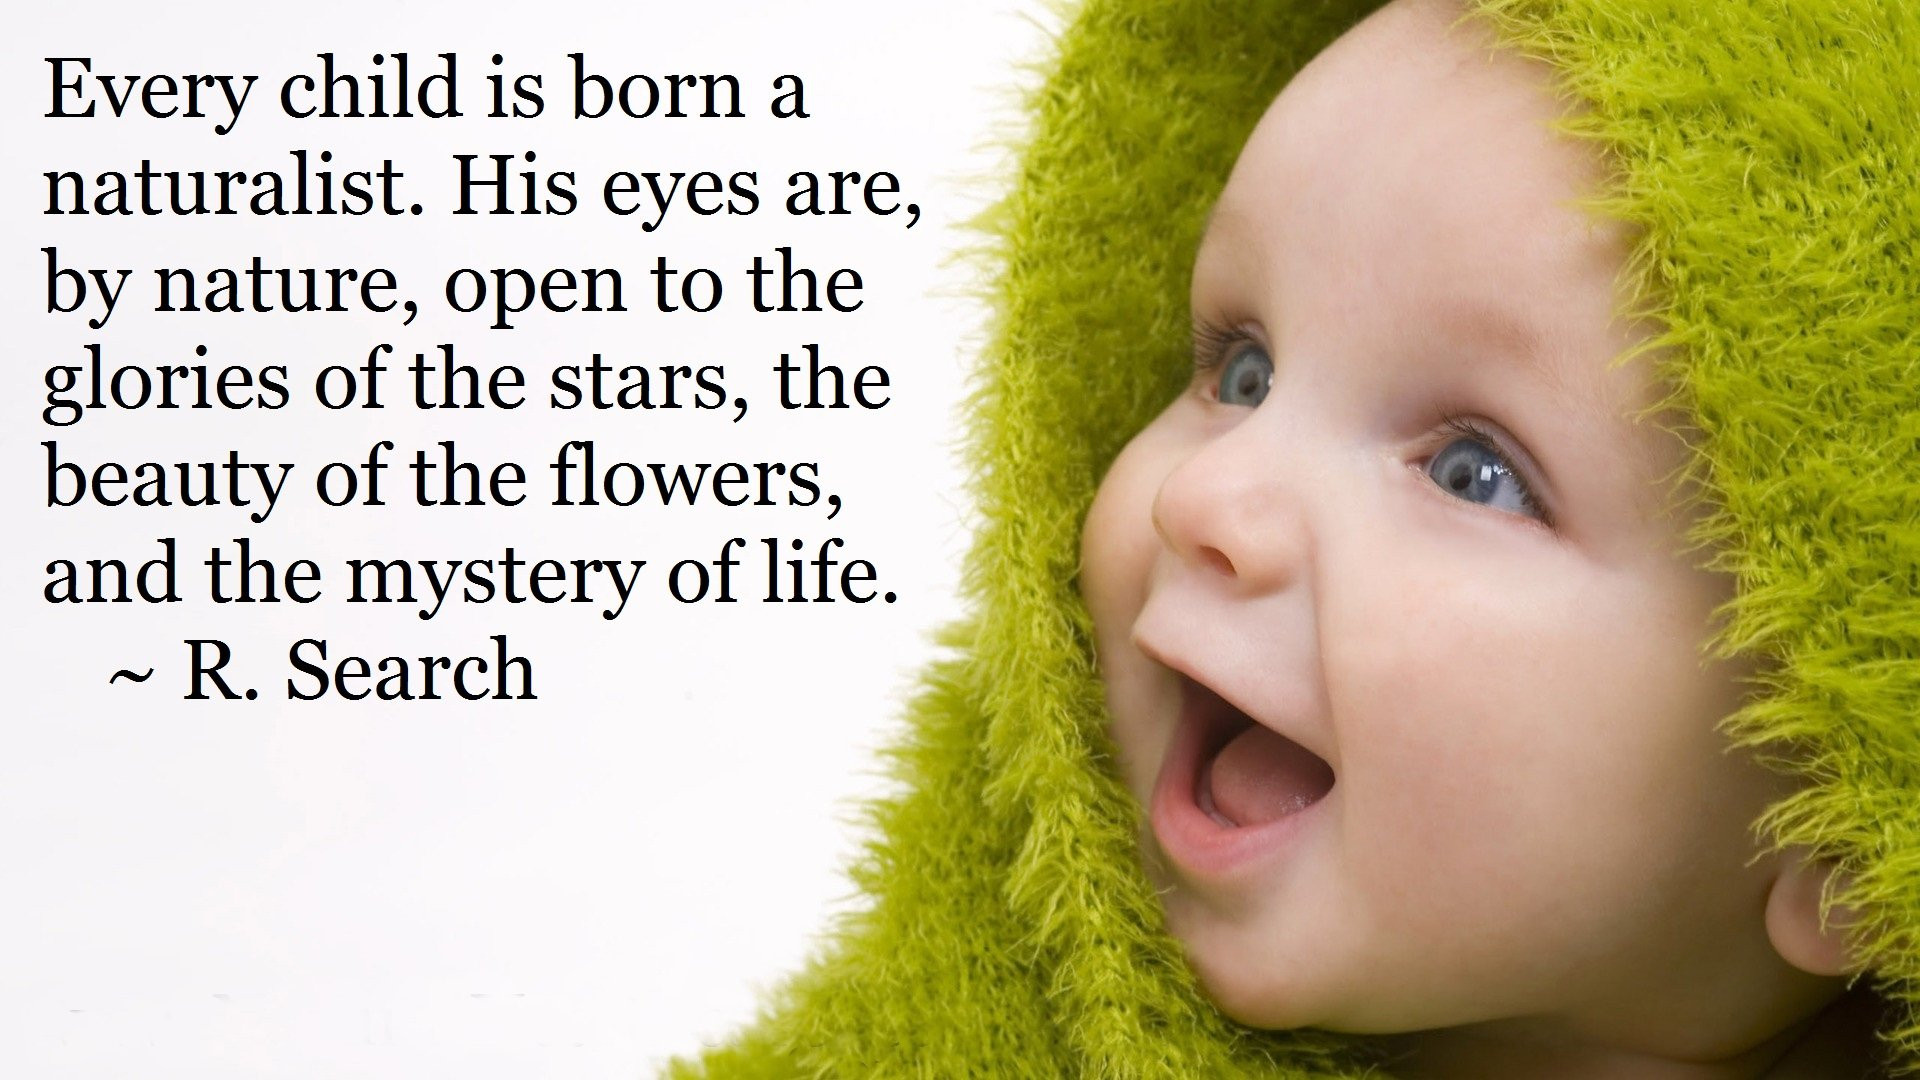 1920x1080 Babies Wallpapers With Quotes Cute Baby Wallpapers With Quotes, 45 Full Hd  Quality Cute Baby